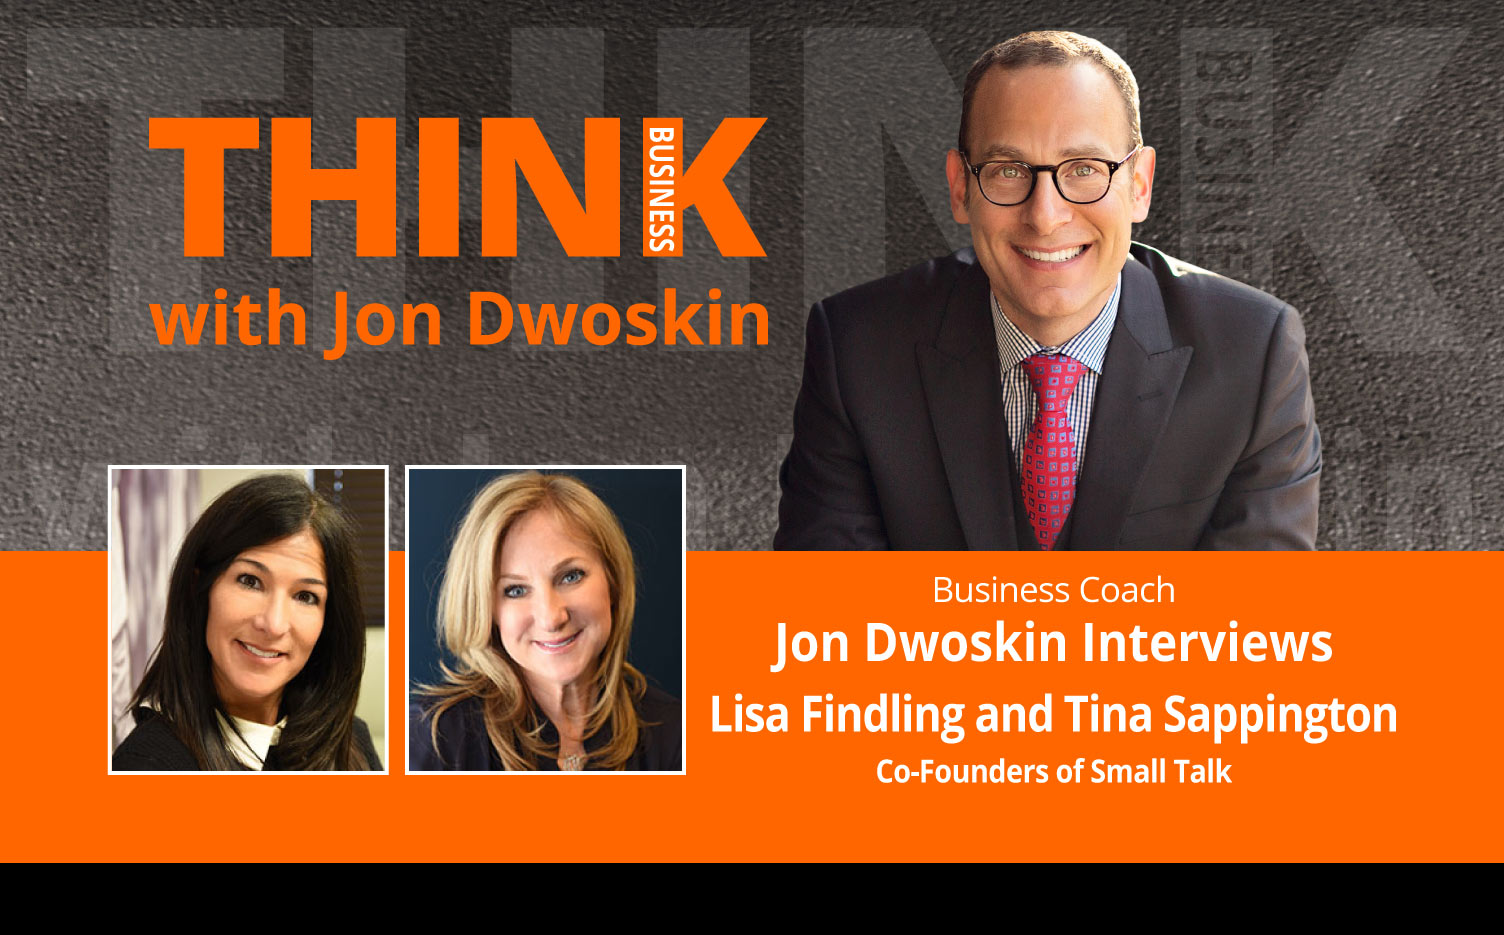 THINK Business Podcast: Jon Dwoskin Interviews Lisa Findling and Tina Sappington, Co-Founders of Small Talk